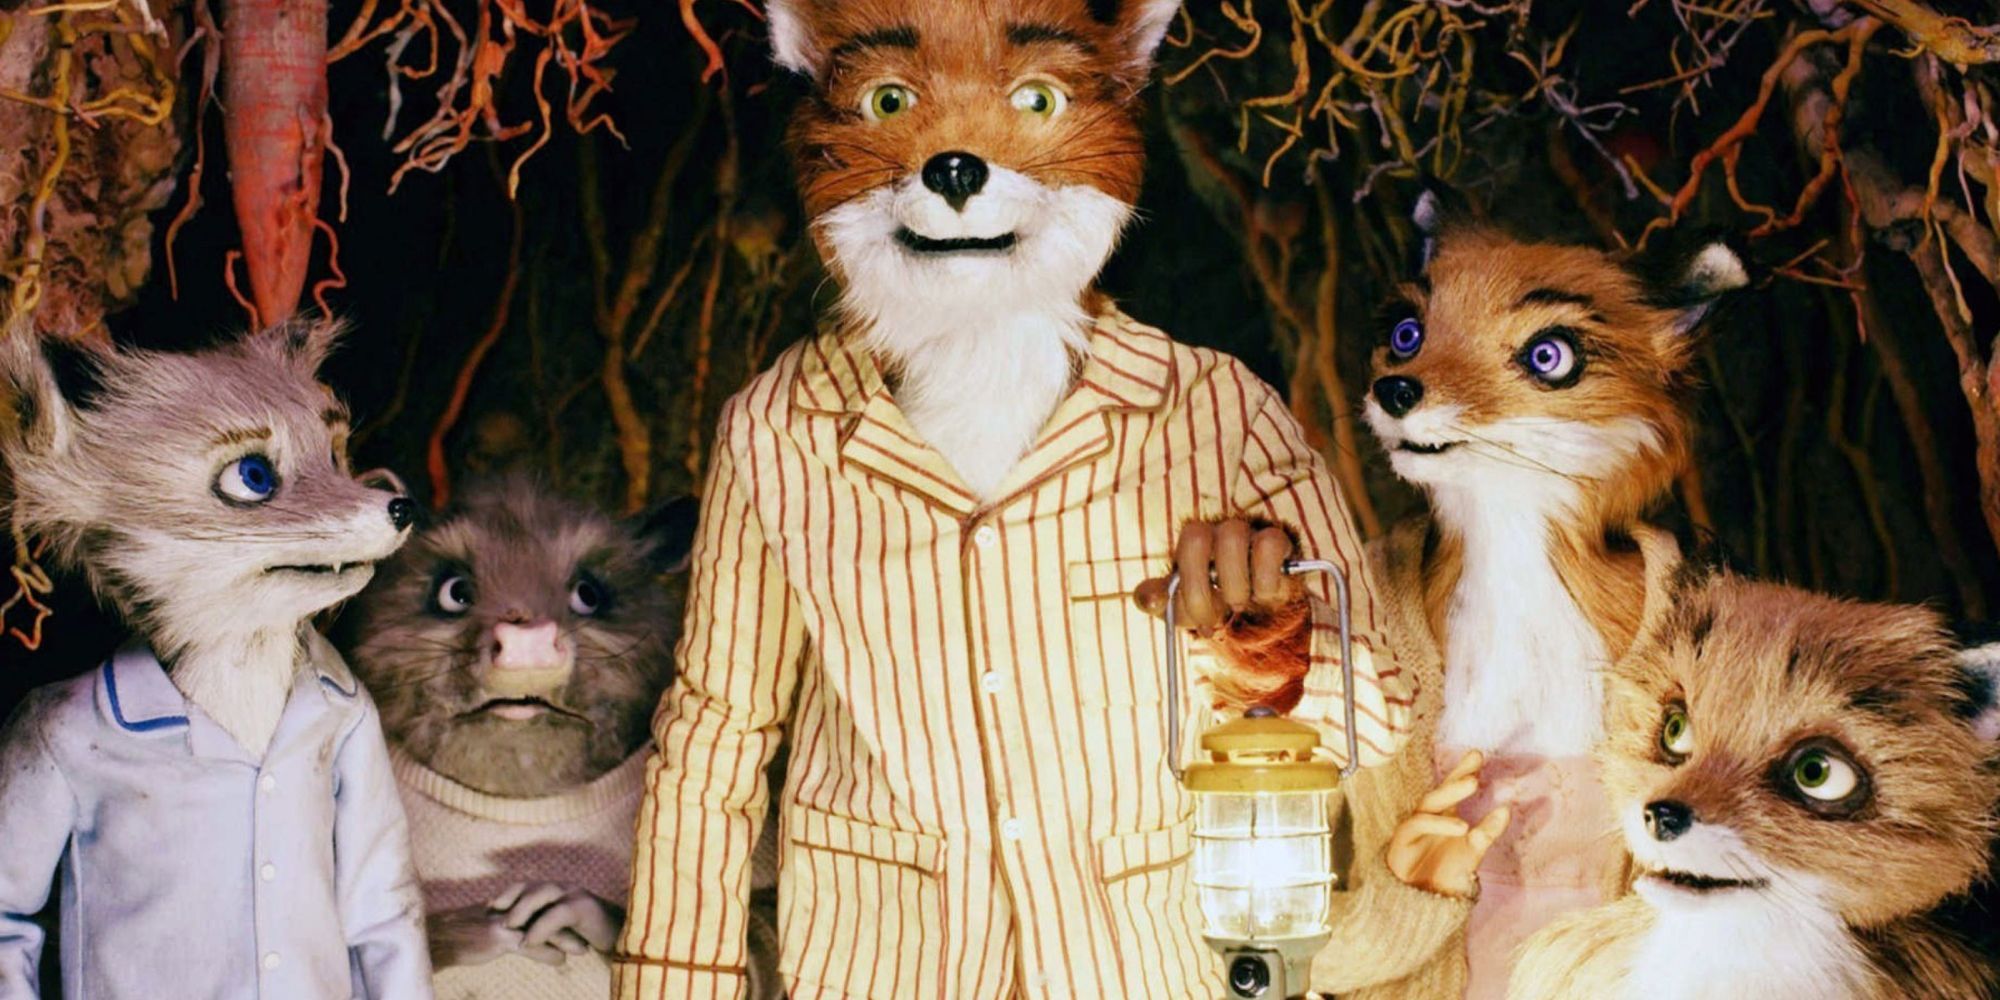 Mr. Fox with his family in Fantastic Mr. Fox (2009)